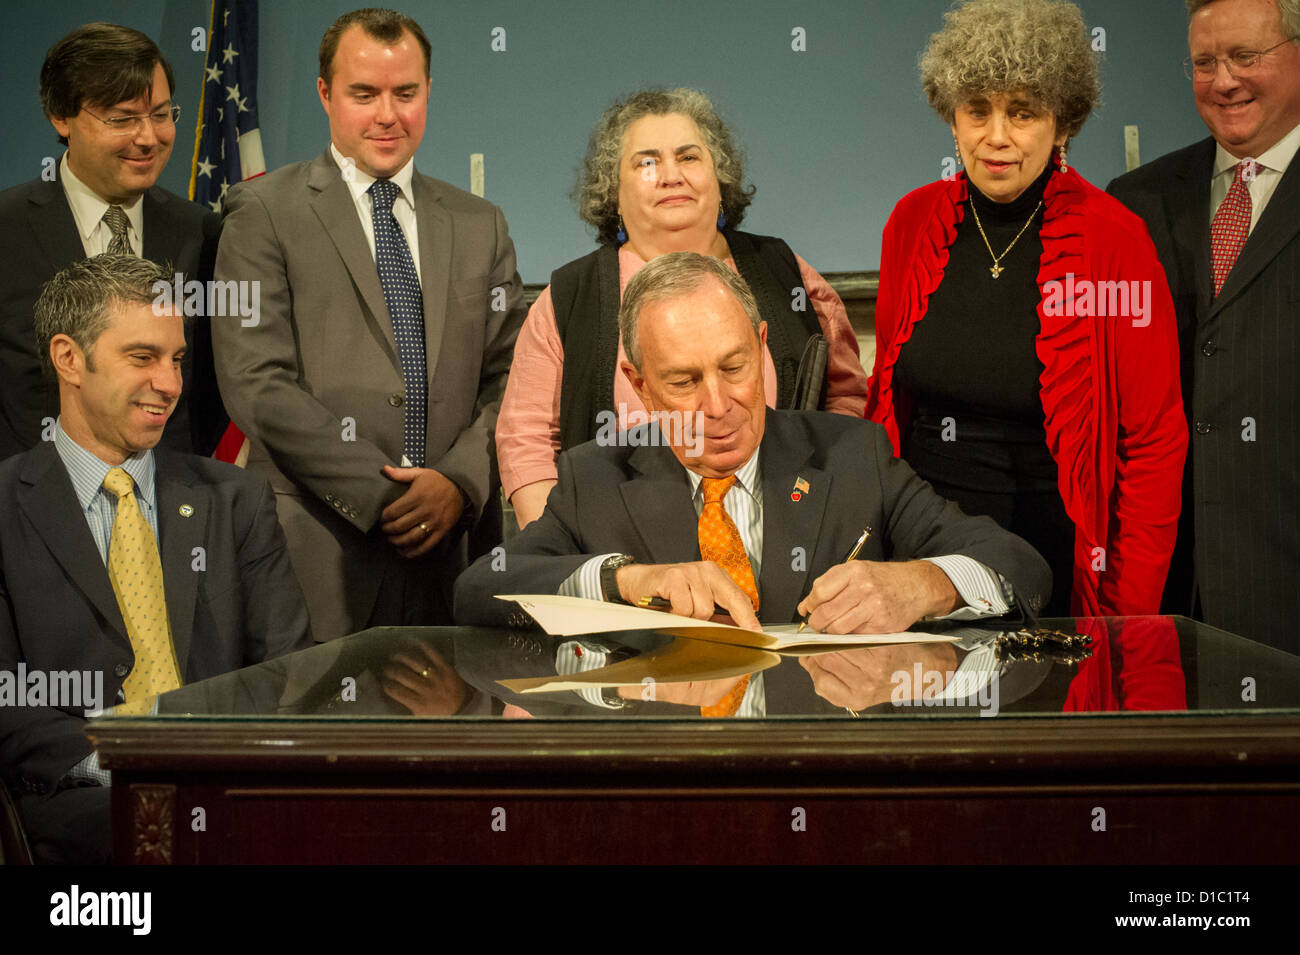 Mayor Mike Bloomberg, joined by City Council members and government officials, at a bill signing ceremony Stock Photo